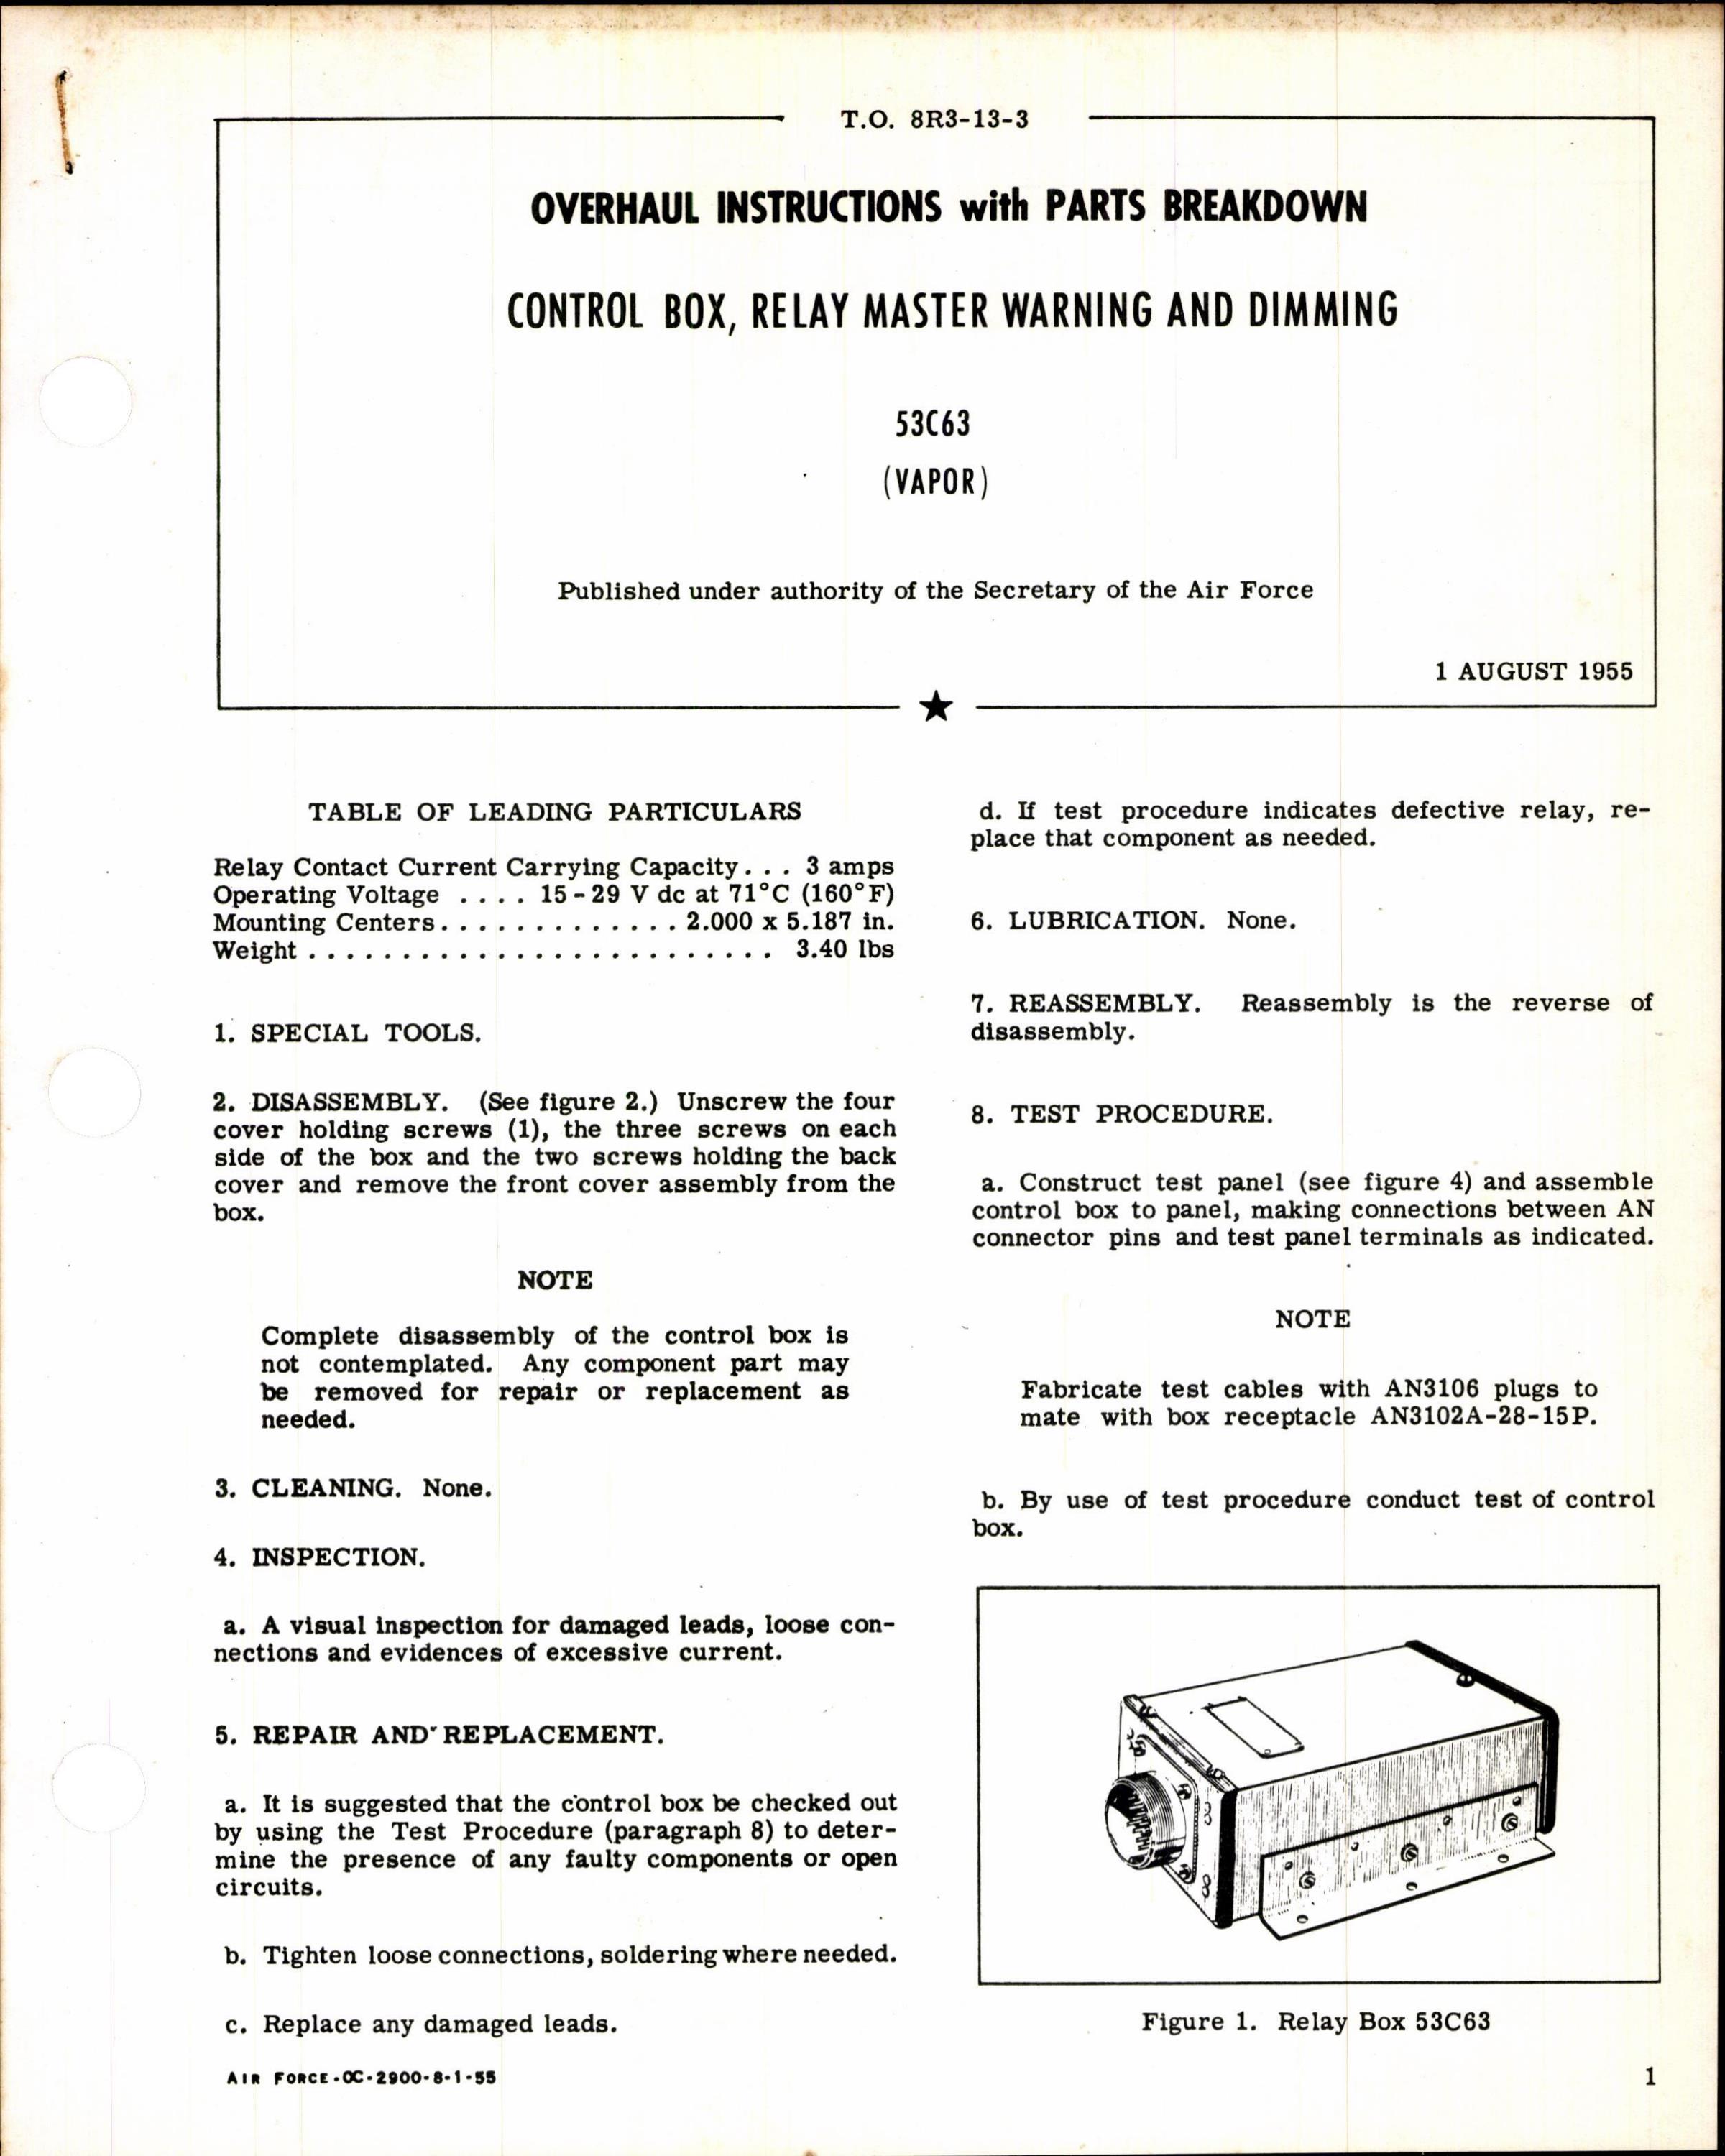 Sample page 1 from AirCorps Library document: Control Box, Relay Master Warning and Dimming